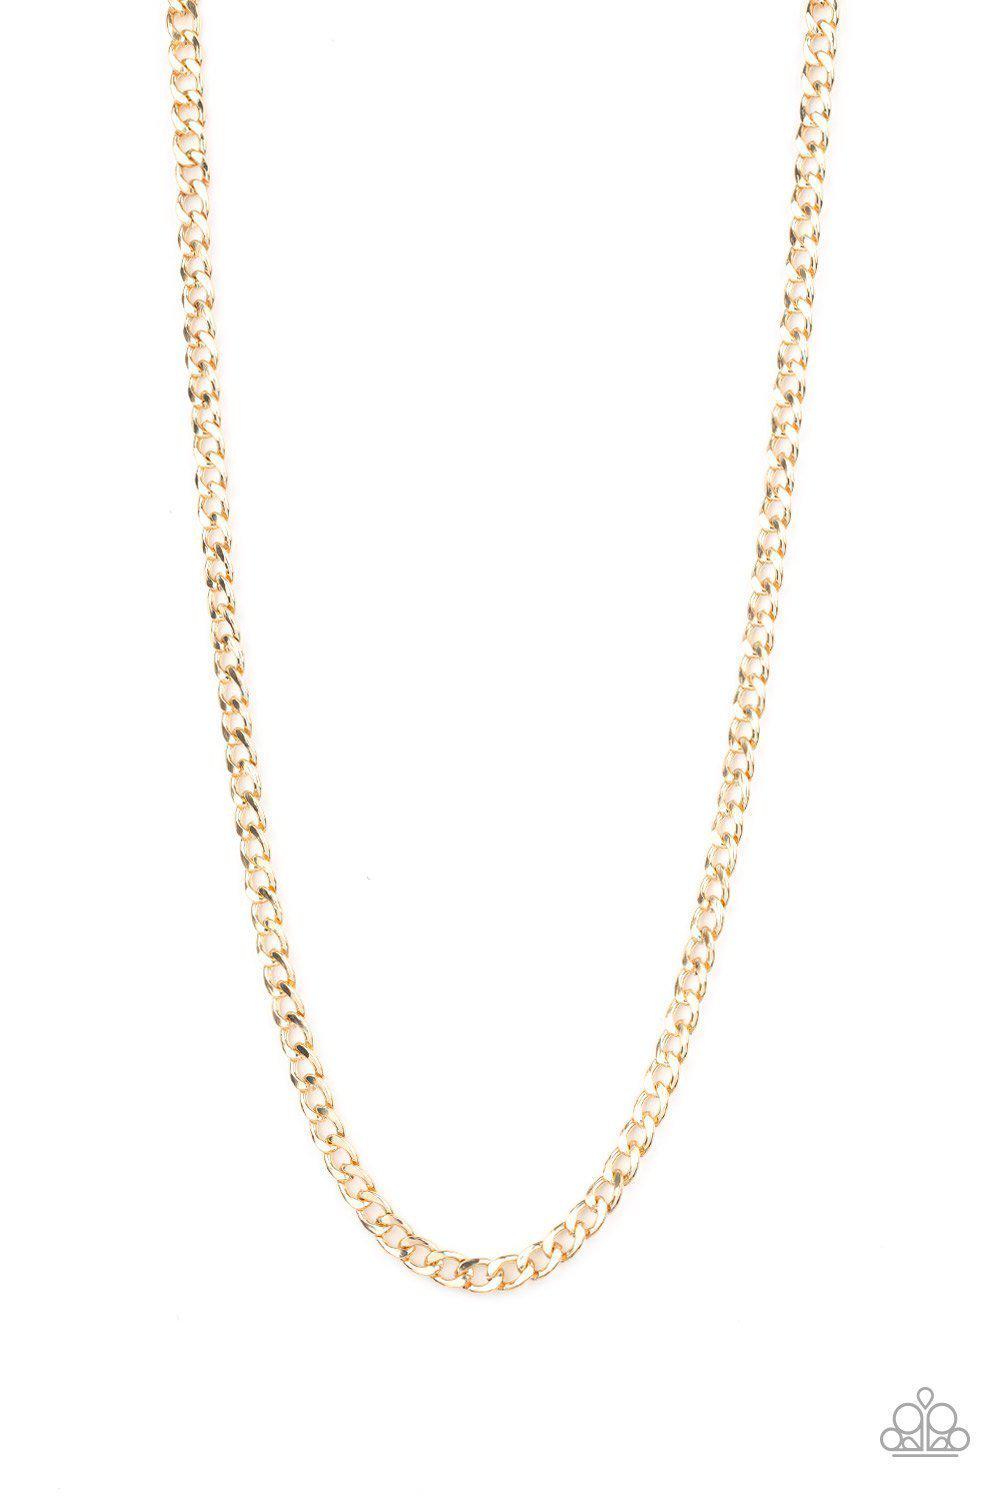 Delta Men's Gold Chain Necklace - Paparazzi Accessories-CarasShop.com - $5 Jewelry by Cara Jewels